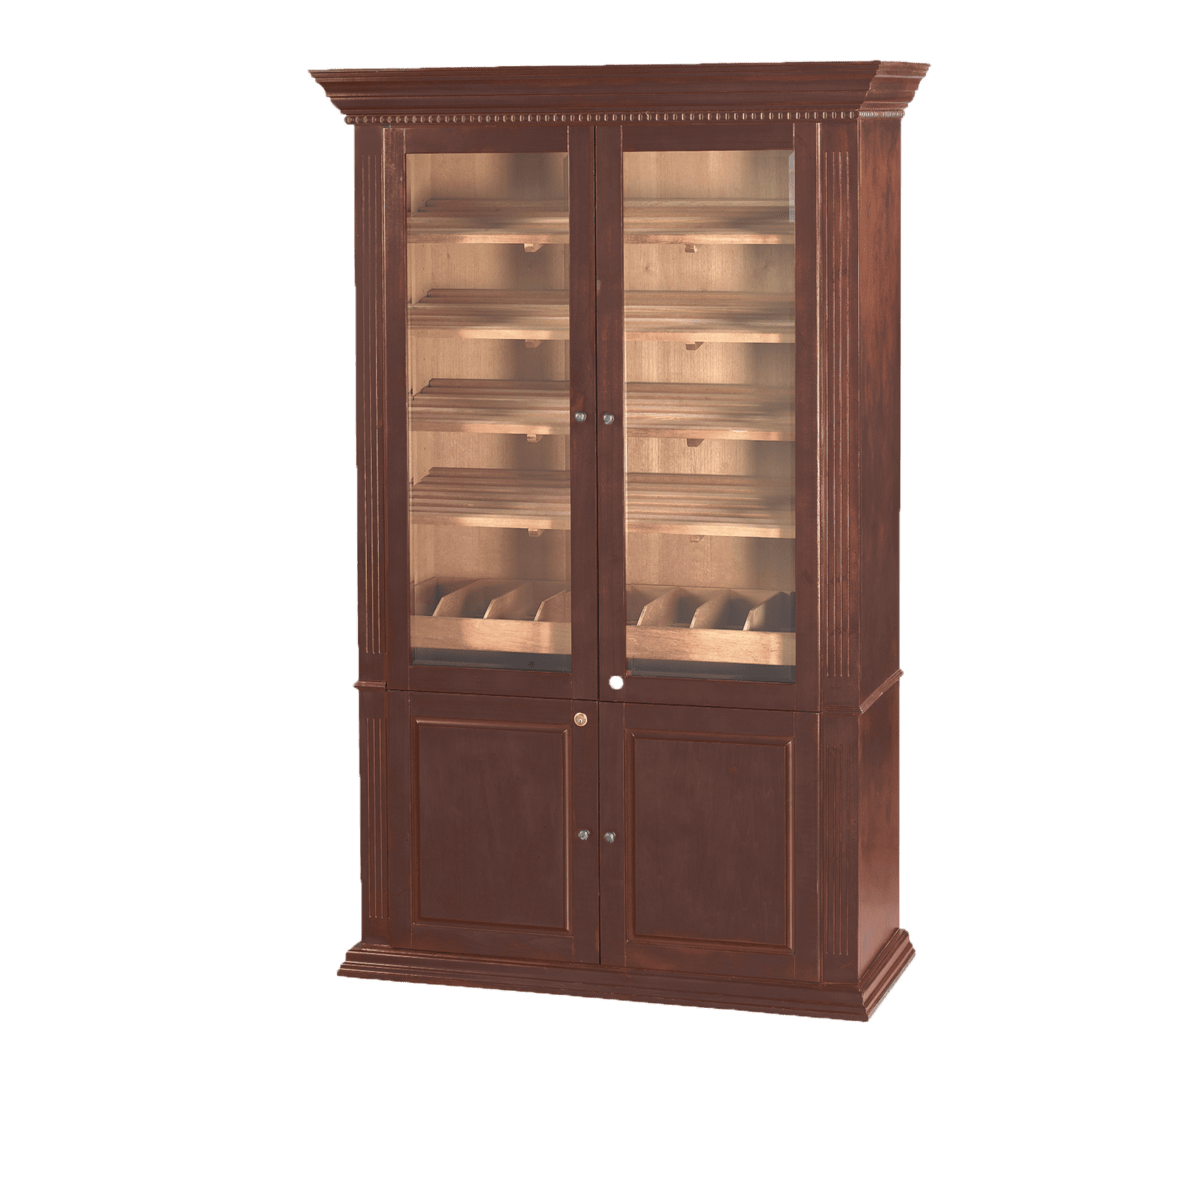 Humidor Supreme Commercial Cigar Humidor Cabinet | Holds 5000 Cigars HUM-5000 Cigar Humidors HUM-5000 Luxury Appliances Direct